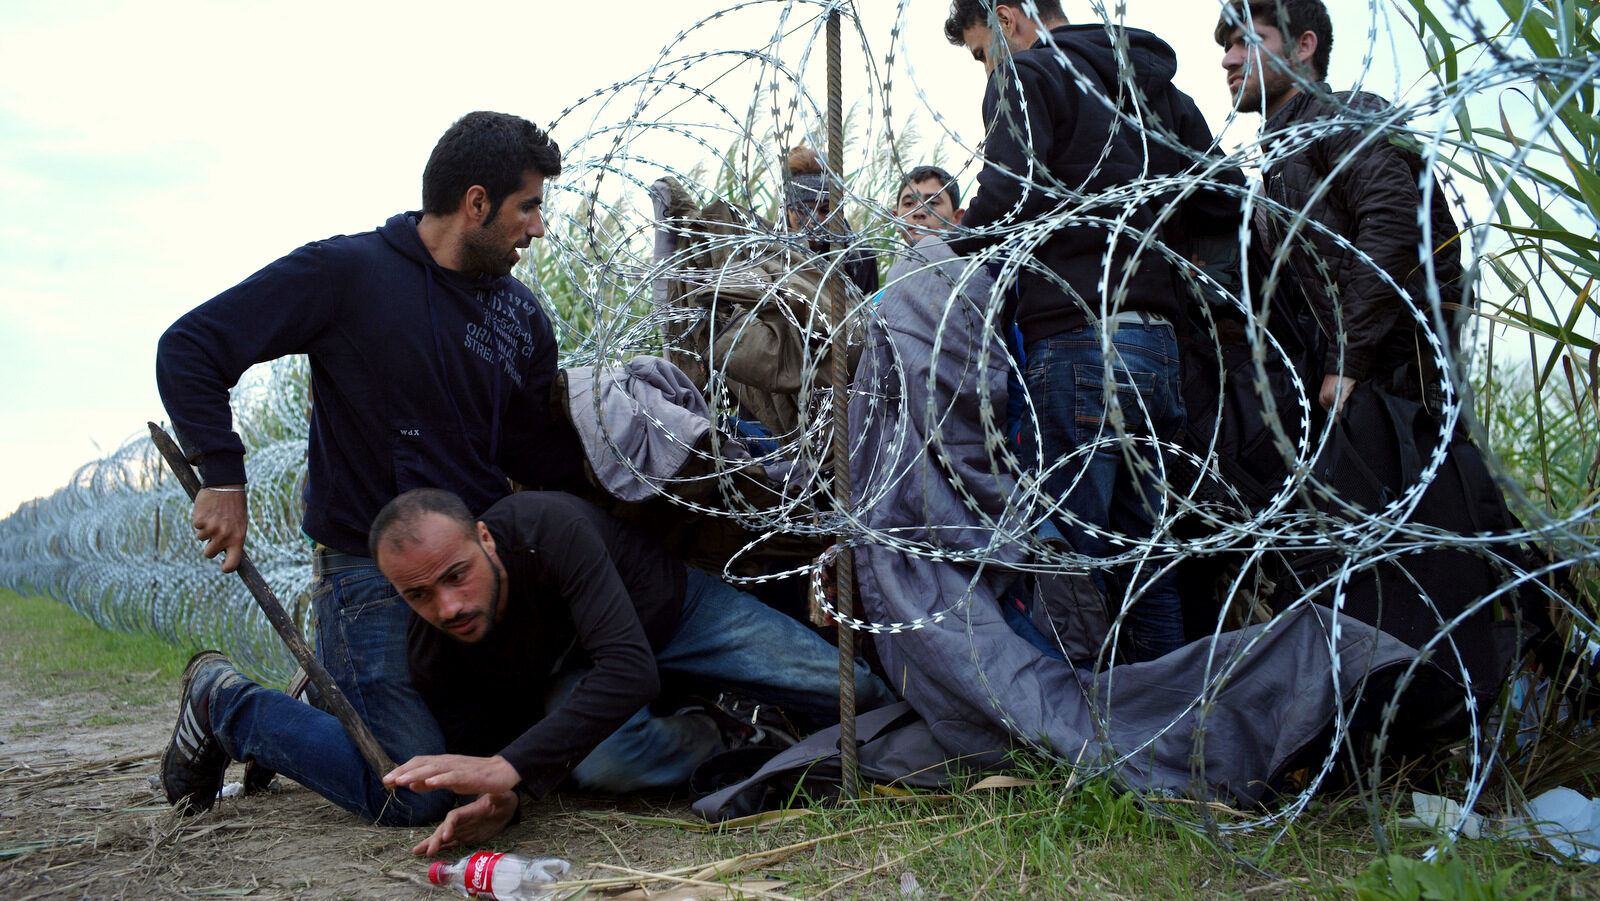 Syrian refugees cross into Hungary underneath the border fence on the Hungarian - Serbian border near Roszke, Hungary on Aug. 26, 2015. The number of refugees entering Hungary has reached a new high as the government hurries to build a 4-meter (13-foot) fence on the Serbian border to stop them. More than 140,000 migrants have reached Hungary on routes across the Balkans so far in 2015. Recently, some 80 percent of them are from war zones like Syria, Iraq and Afghanistan. (AP Photo/Bela Szandelszky)